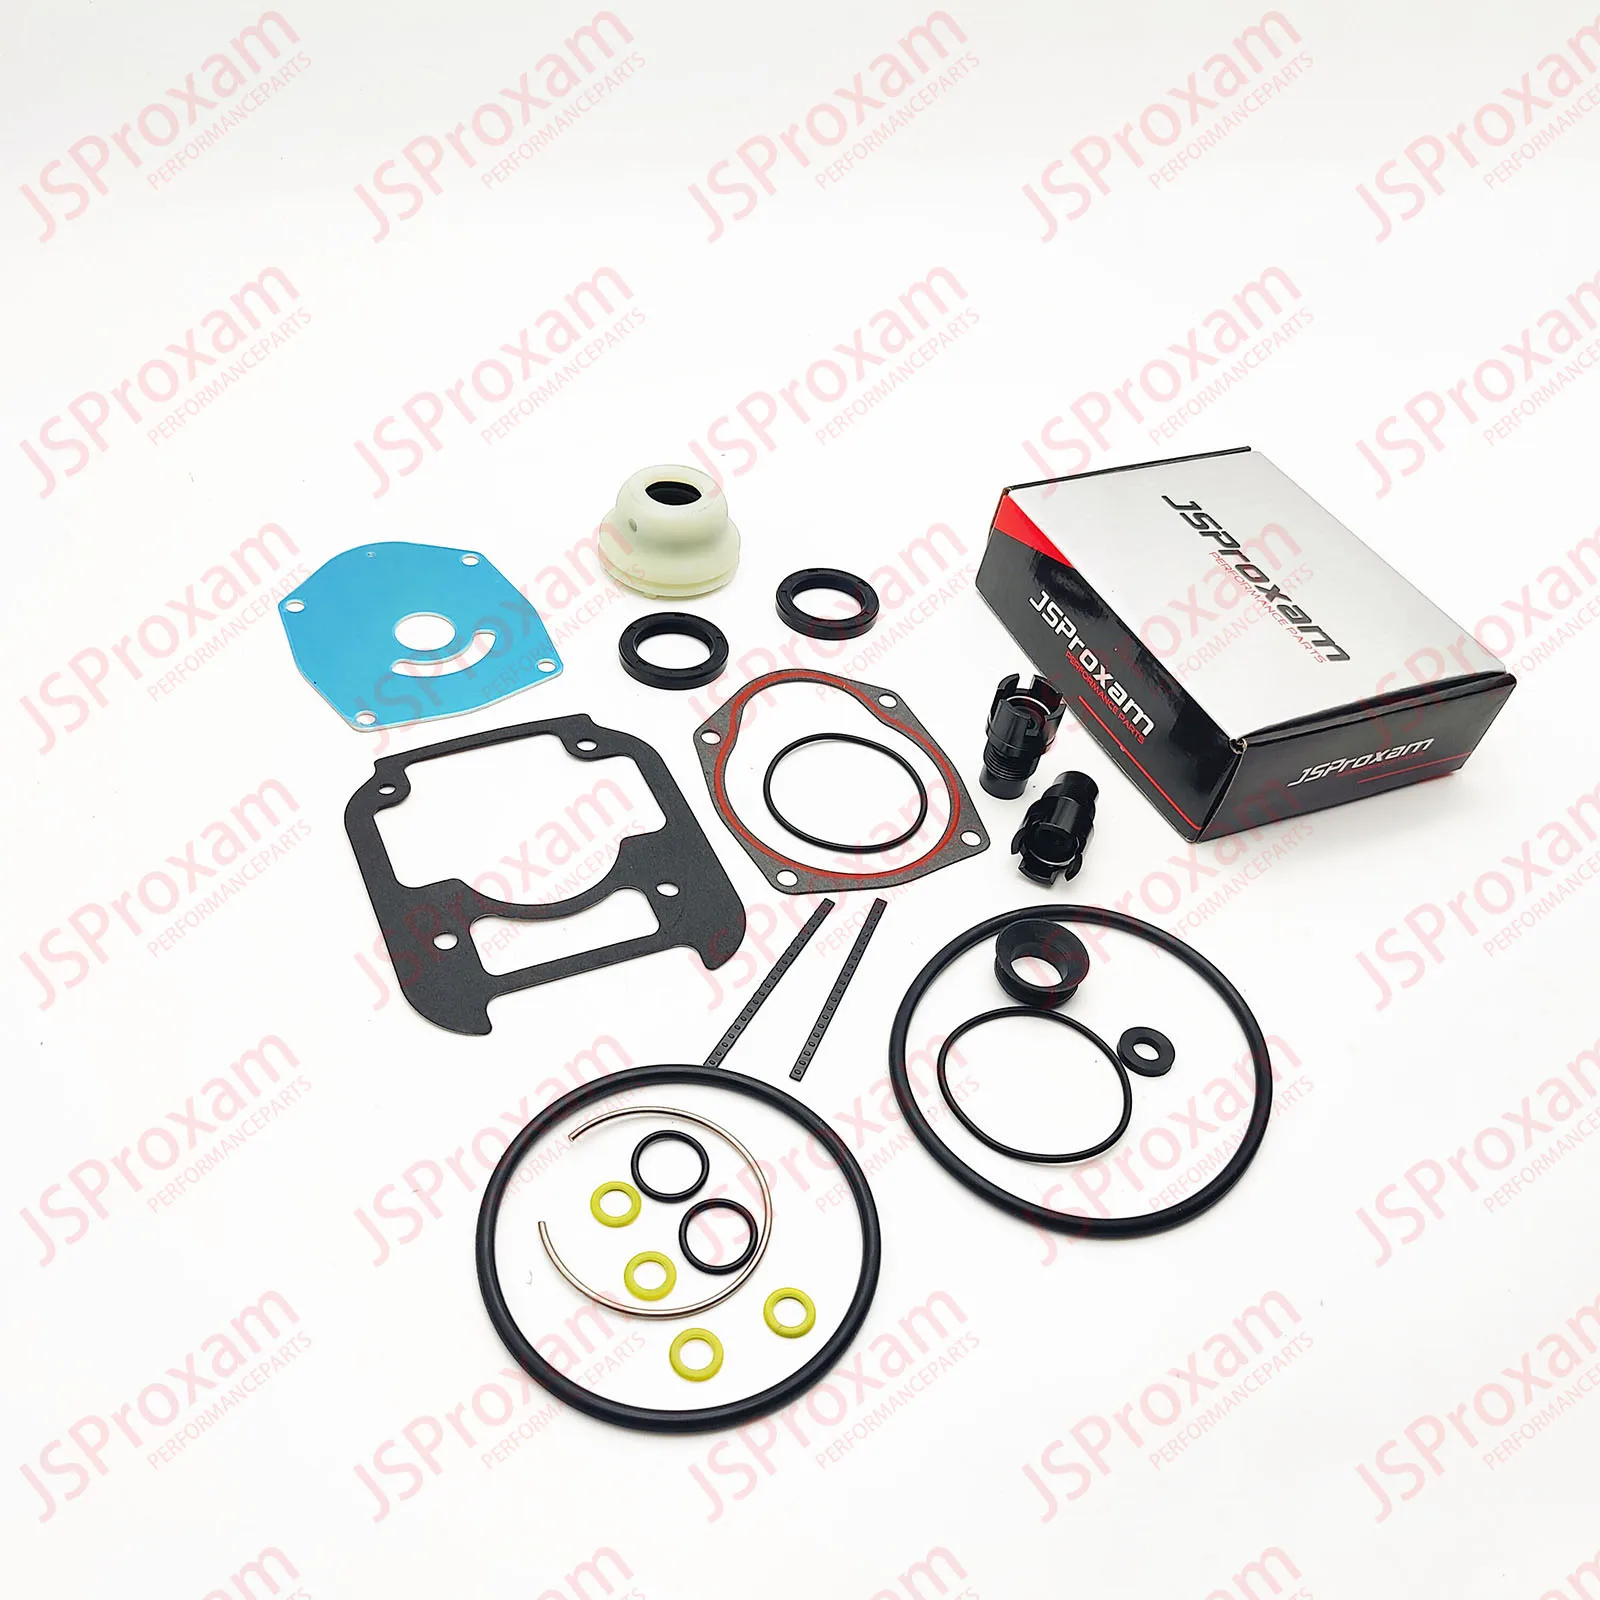 

26-8M0142979 Replaces Fit For Mercury Mariner 8M0142979 175 200 225 250 300 450HP Outboard Gearcase Seal Kit